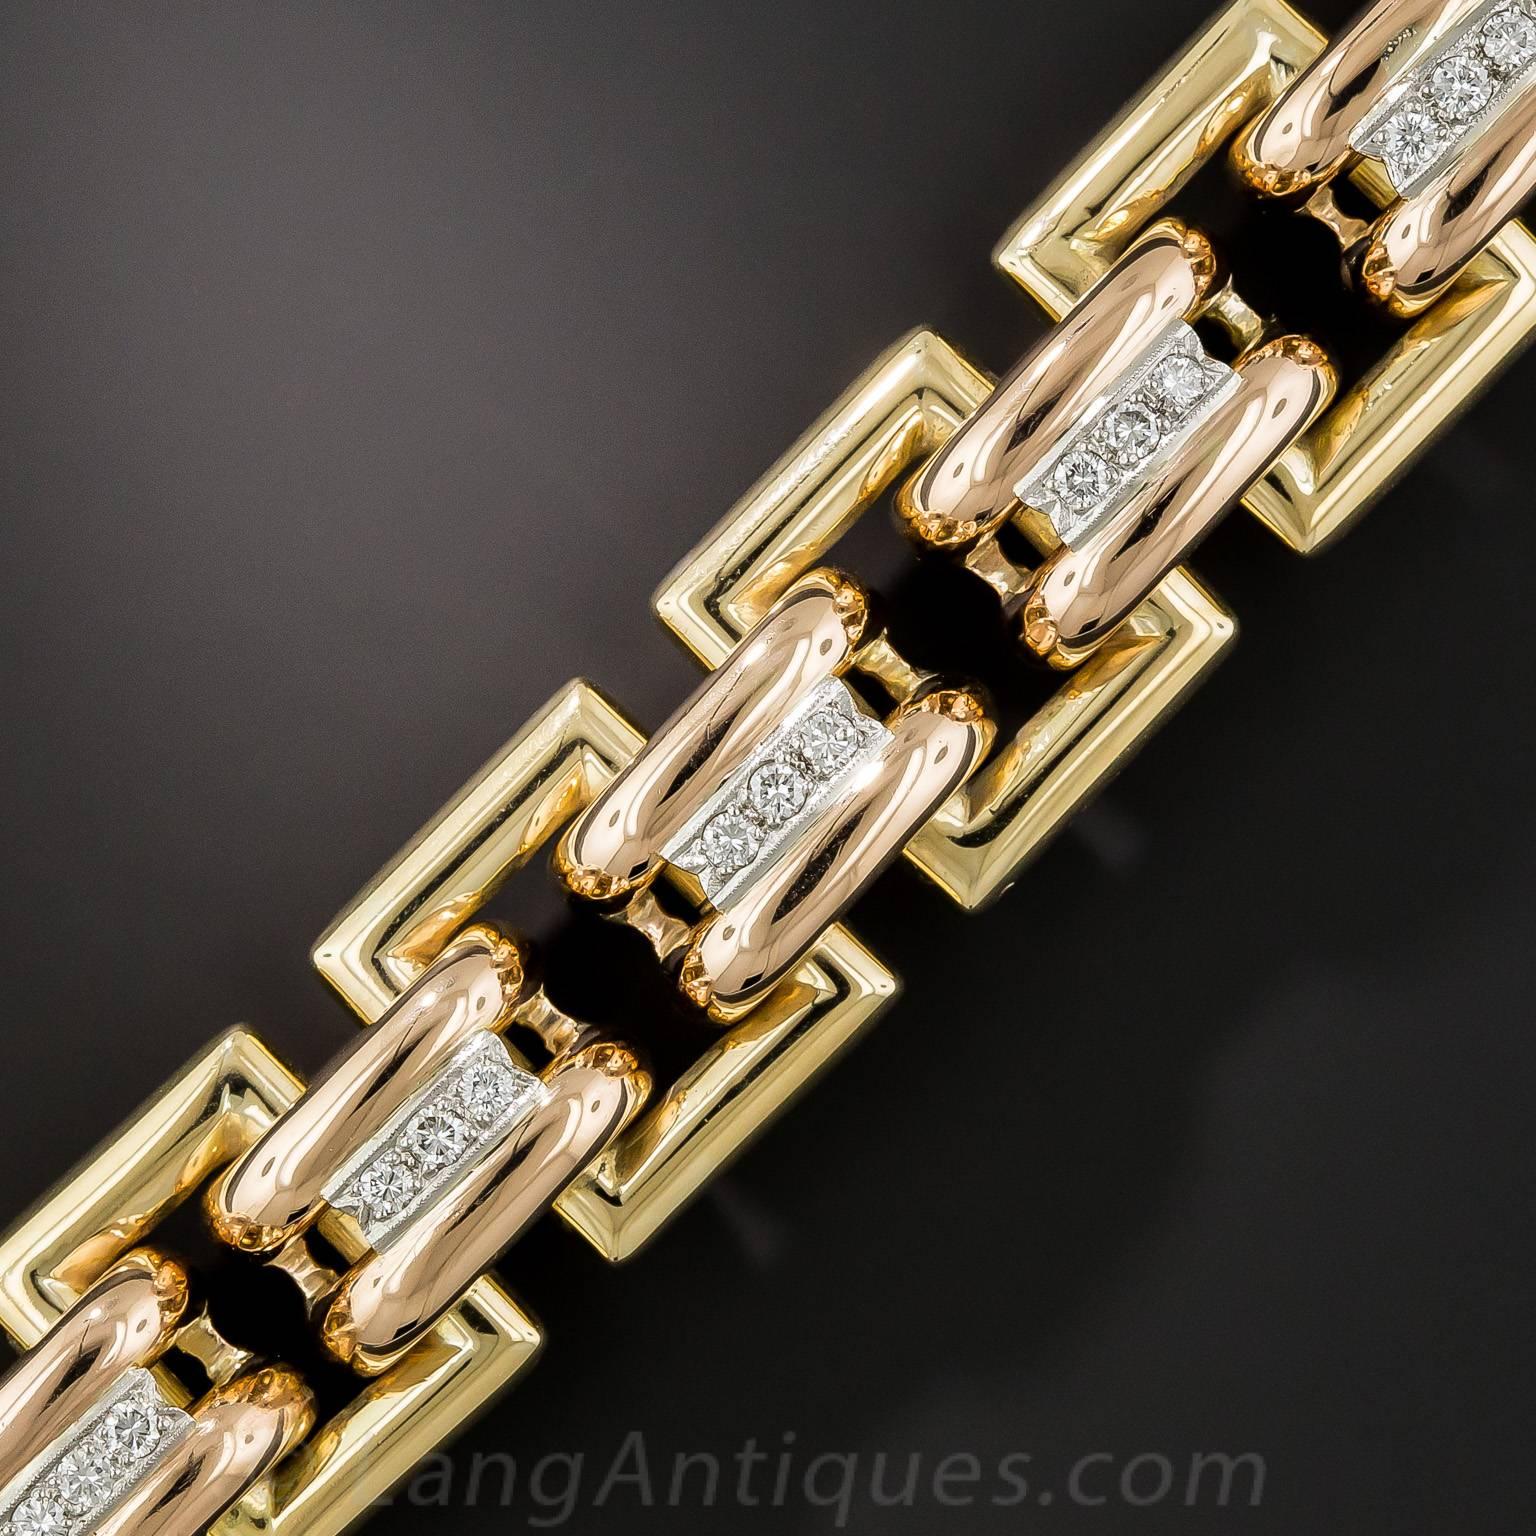 This big, bold, gleaming gold Retro wrist bauble, clocking in at an impressive 5 ounces, is substantially crafted in tri-color 18K gold: yellow gold outer links, rose gold inner links, and white gold to accentuate the center row bright-white